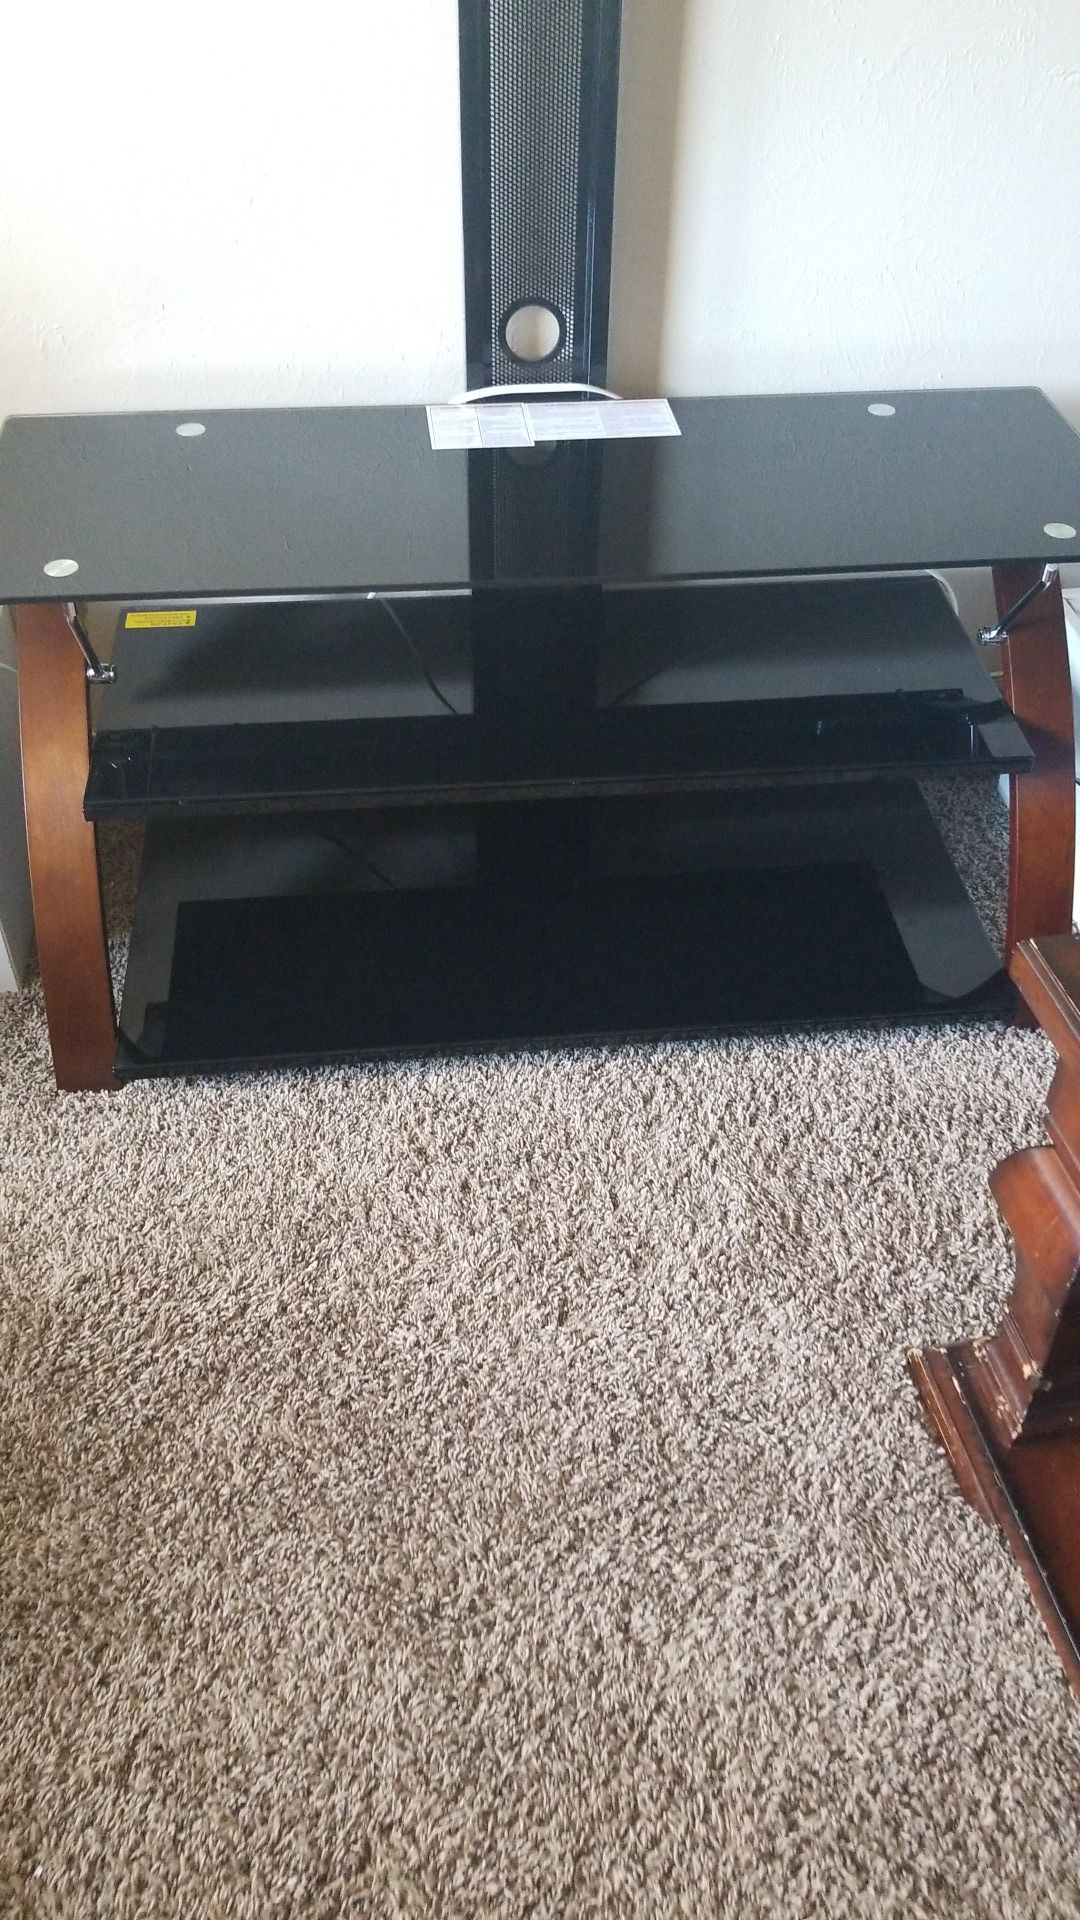 TV stand holds up to 55"